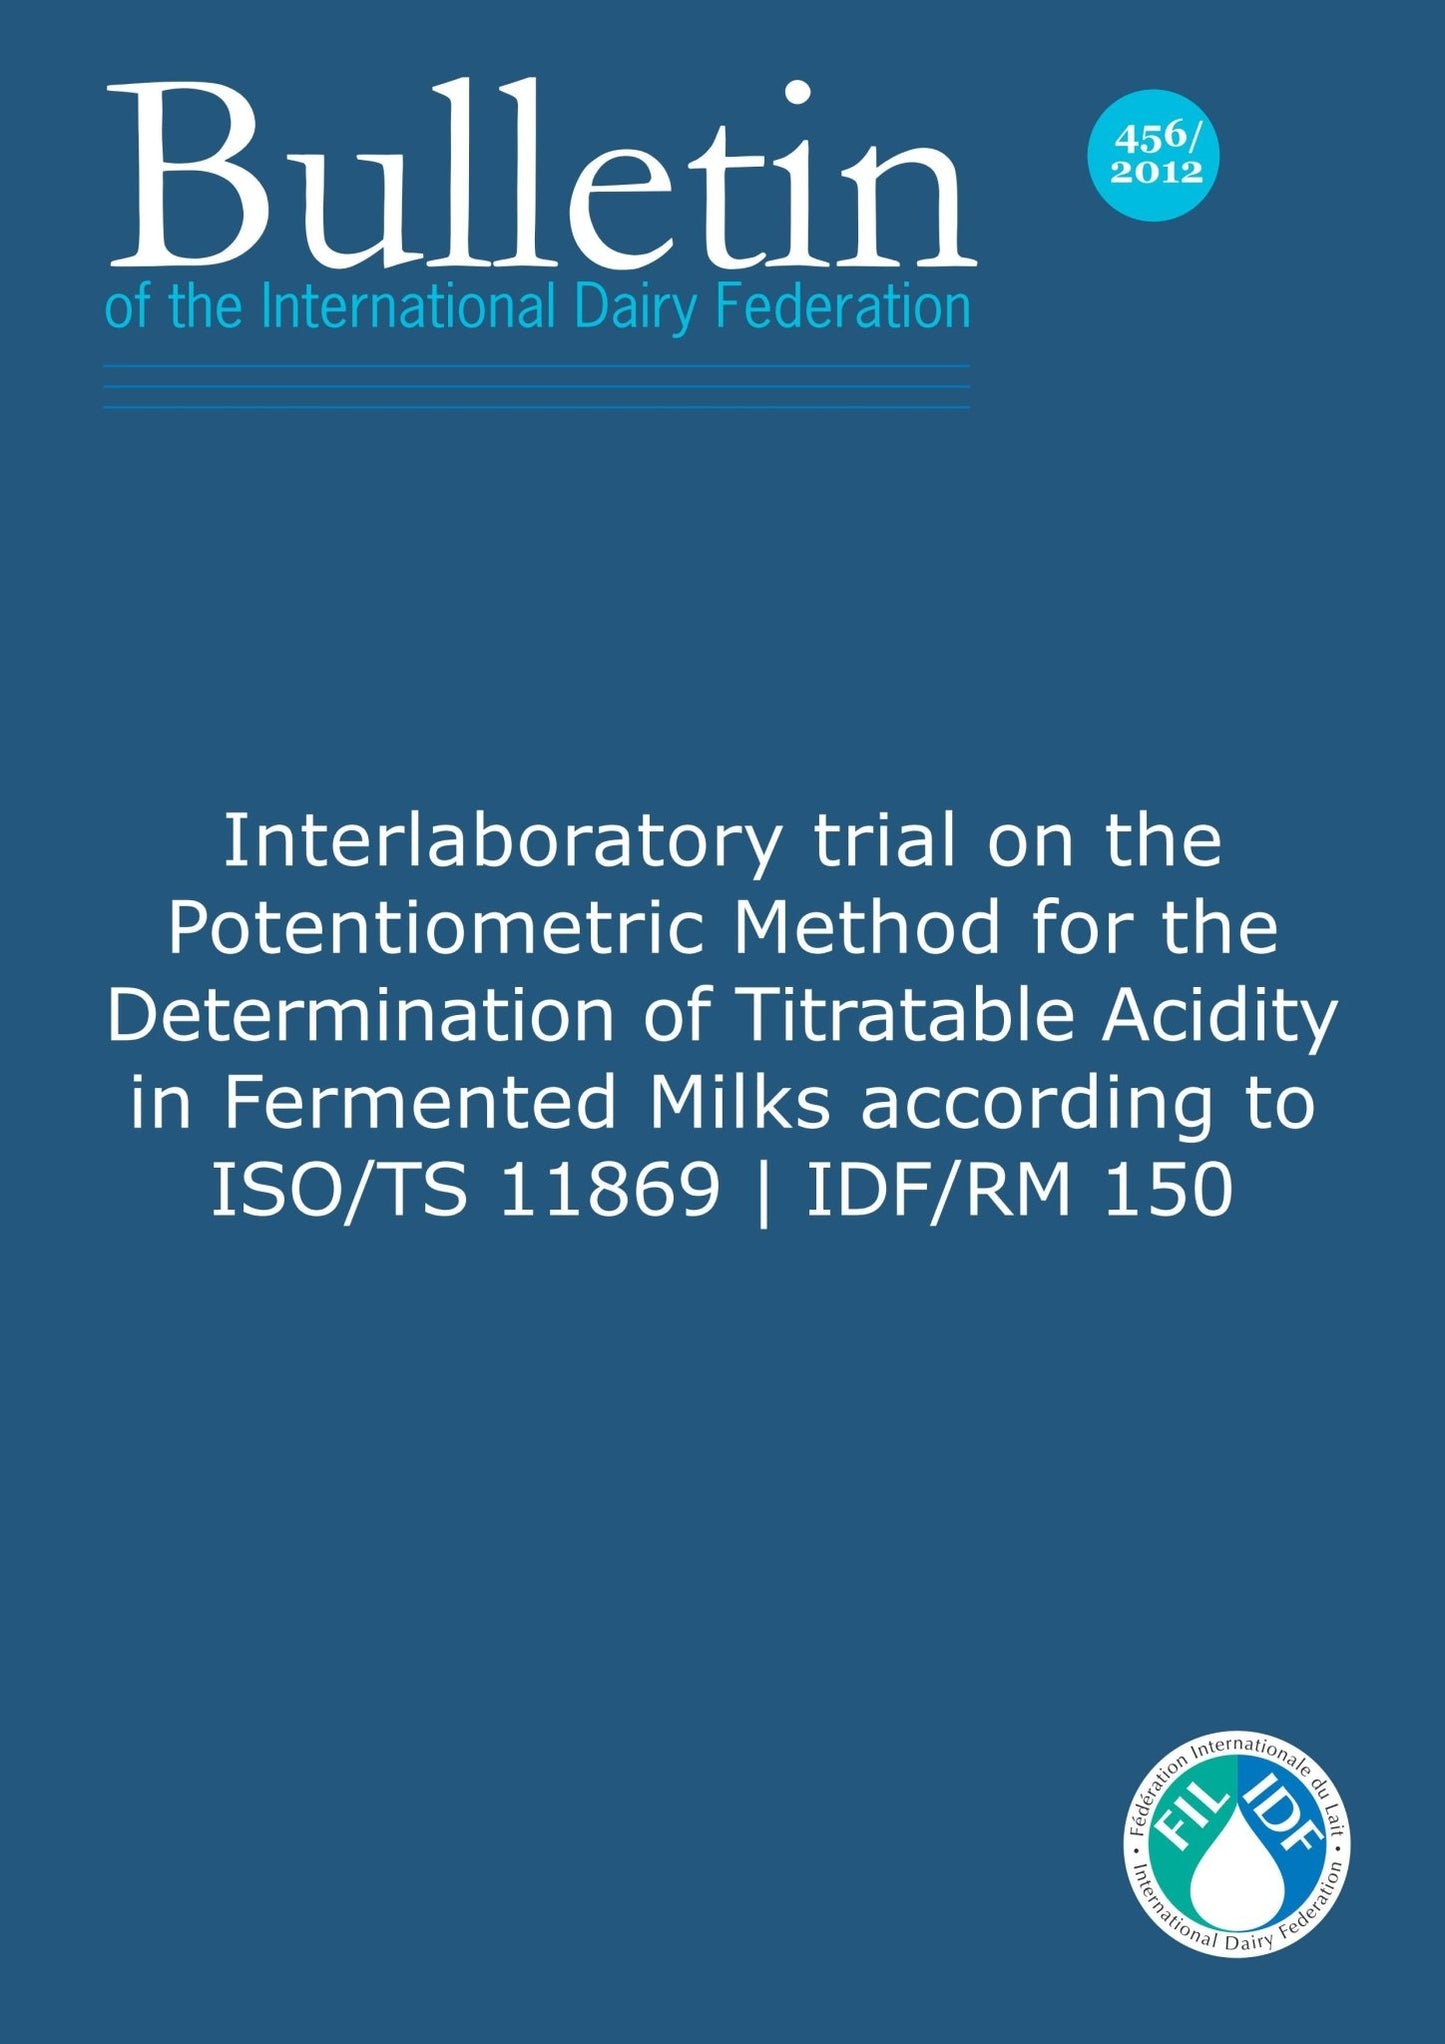 Bulletin of the IDF N° 456/ 2012: Interlaboratory trial on the Potentiometric Method for the Determination of Titratable Acidity in Fermented Milks according to ISO/TS 11869 | IDF/RM 150 - FIL-IDF